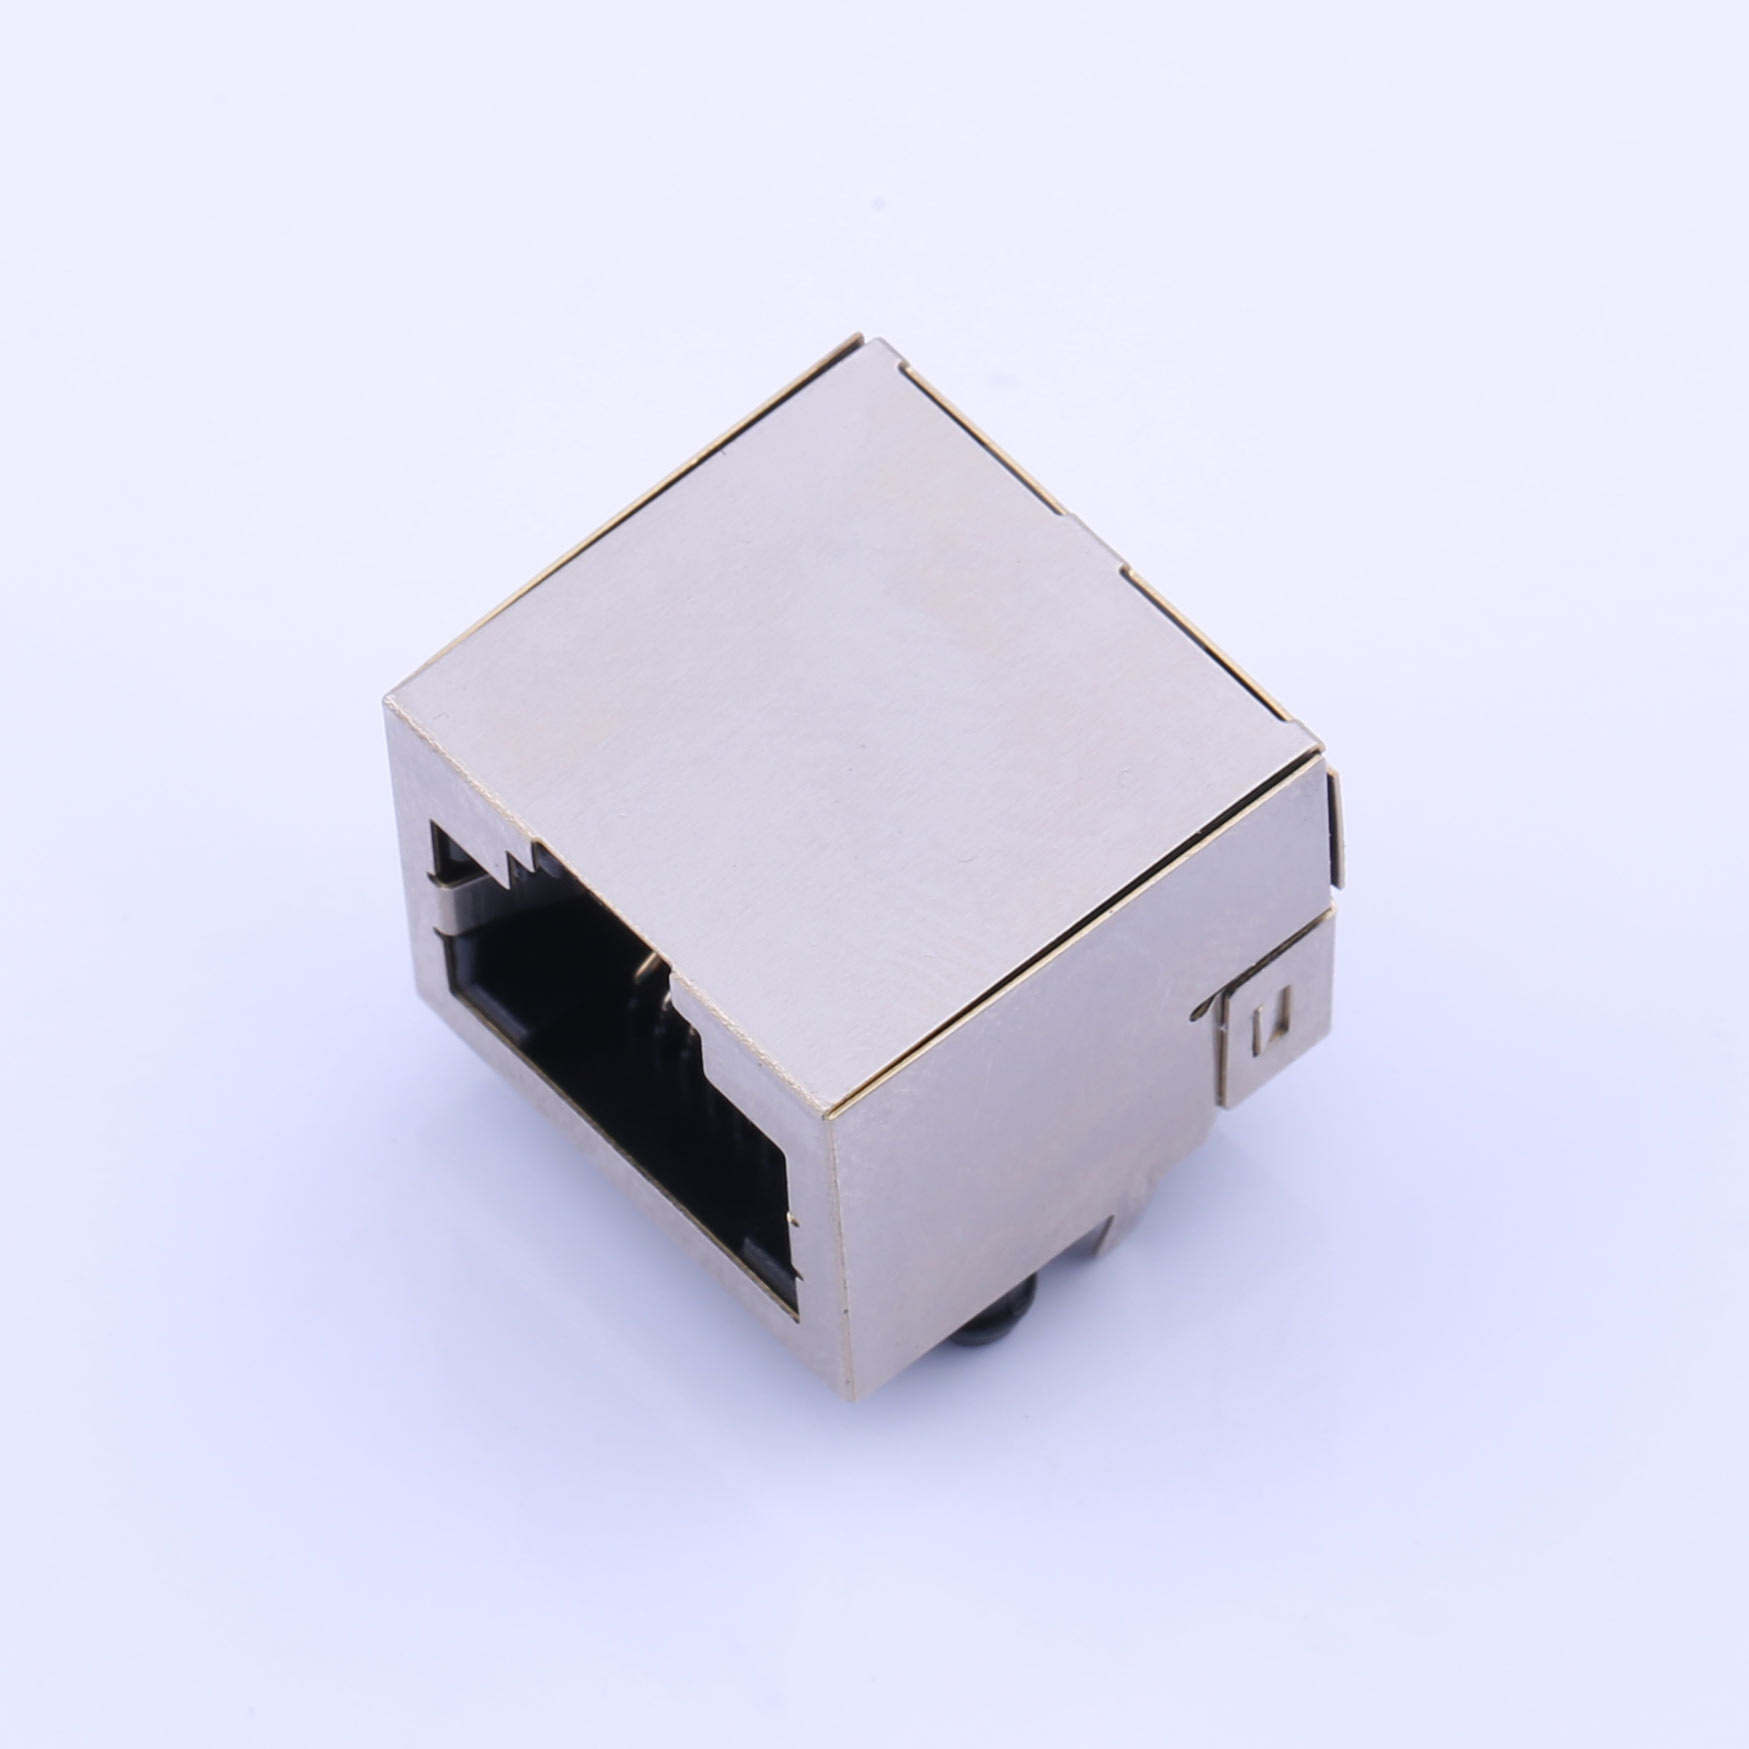 Kinghelm Network interface 8P8C RJ45 female Ethernet connector with LED indicator